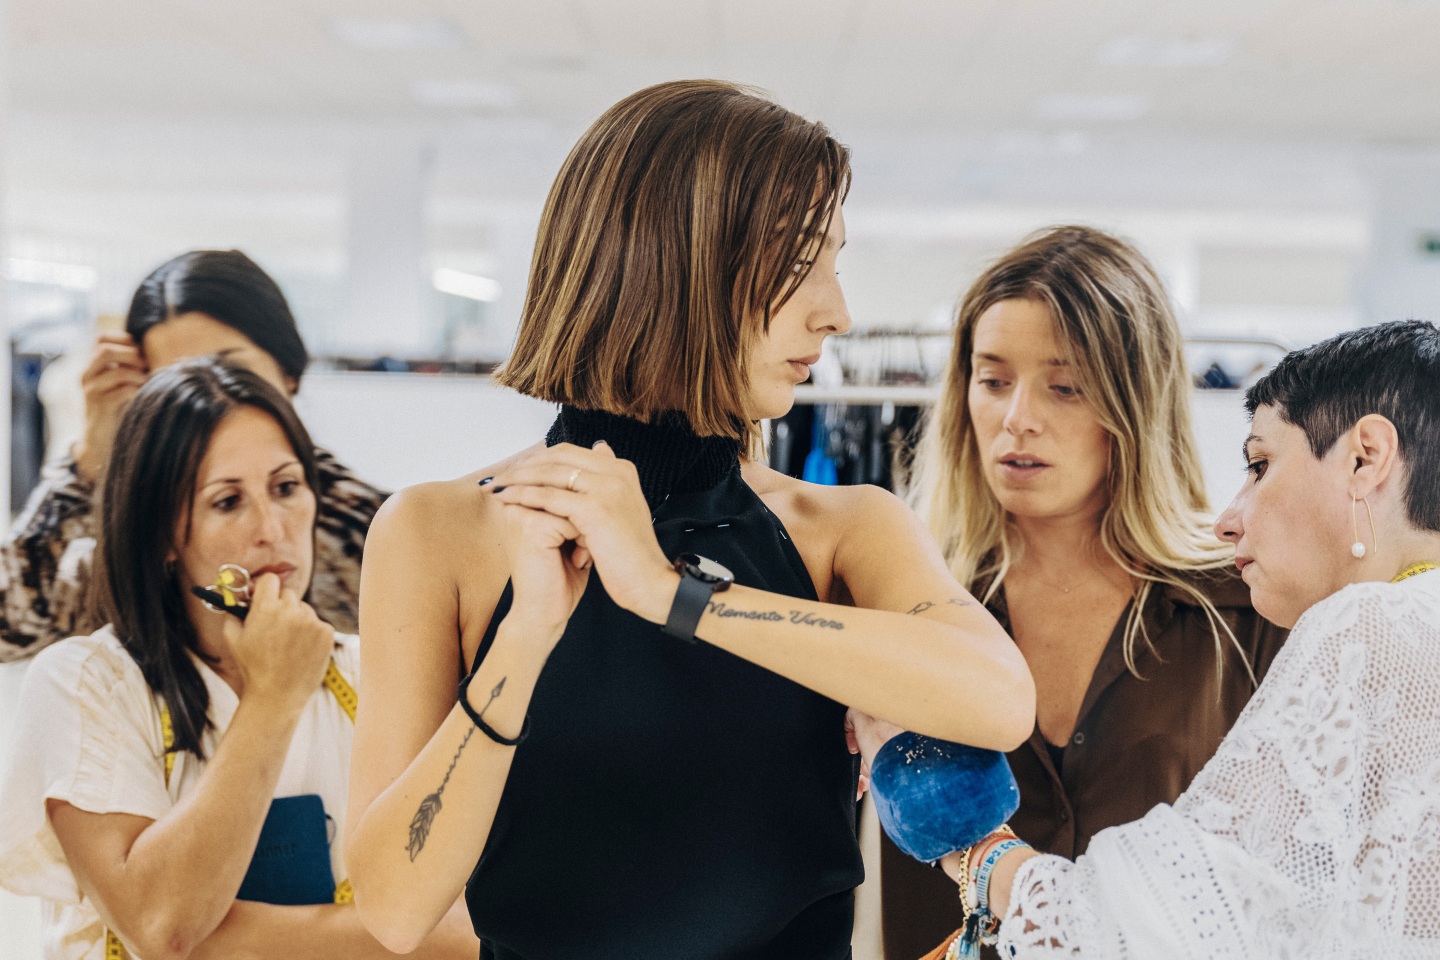 Inditex employees perform a fitting session with a model.